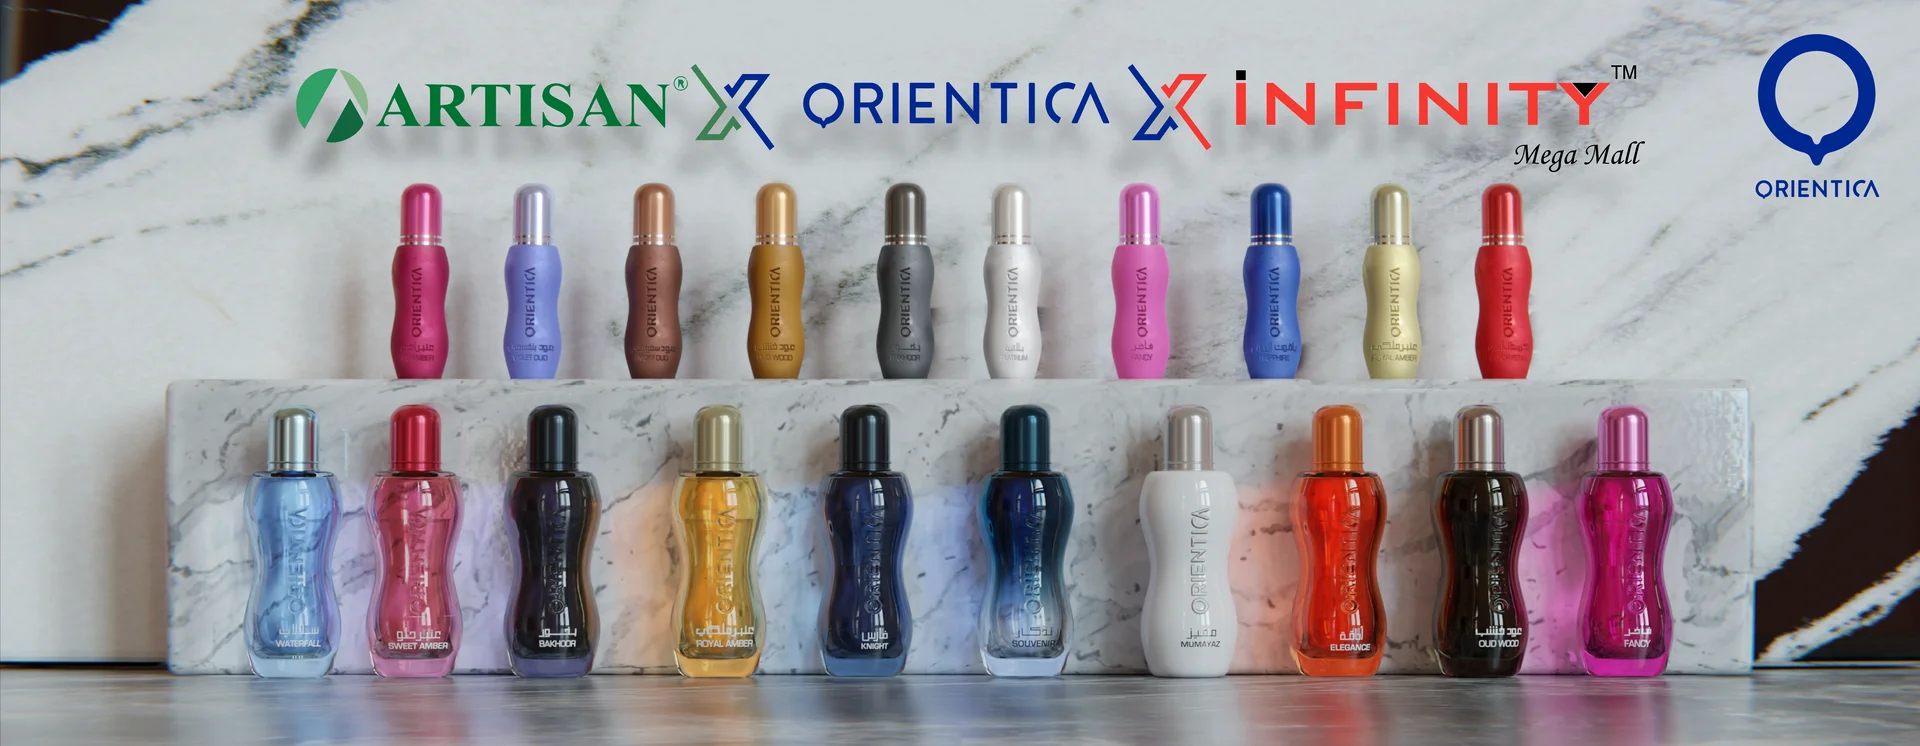 orientica modern trade - artisan outfitters and infinity mega mall